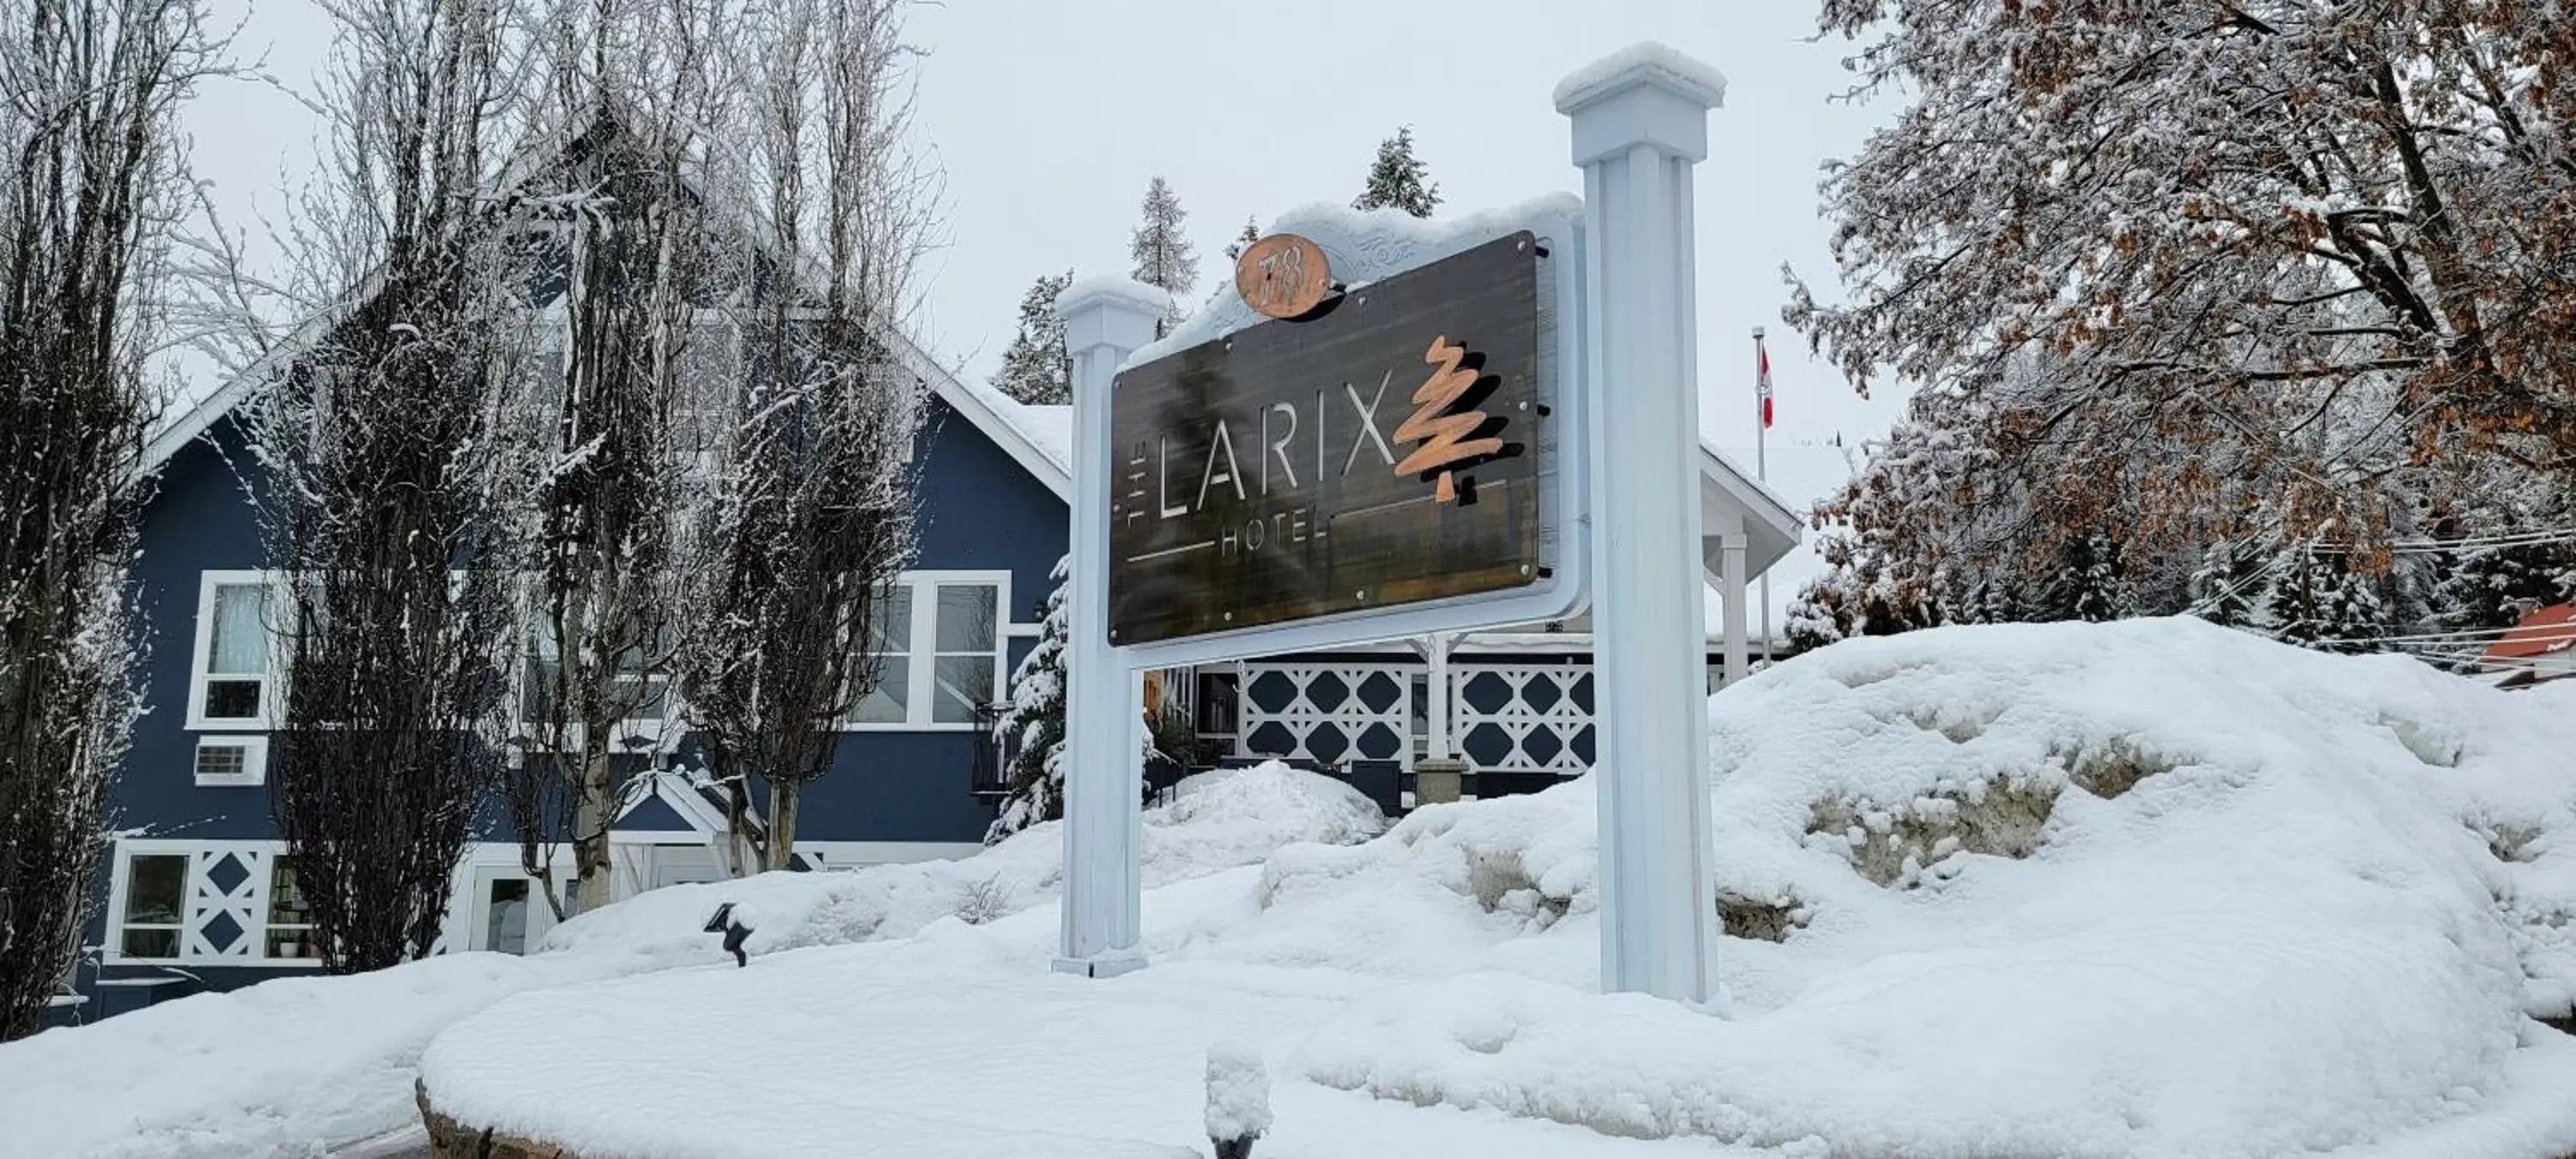 Property building, Winter in The Larix Hotel